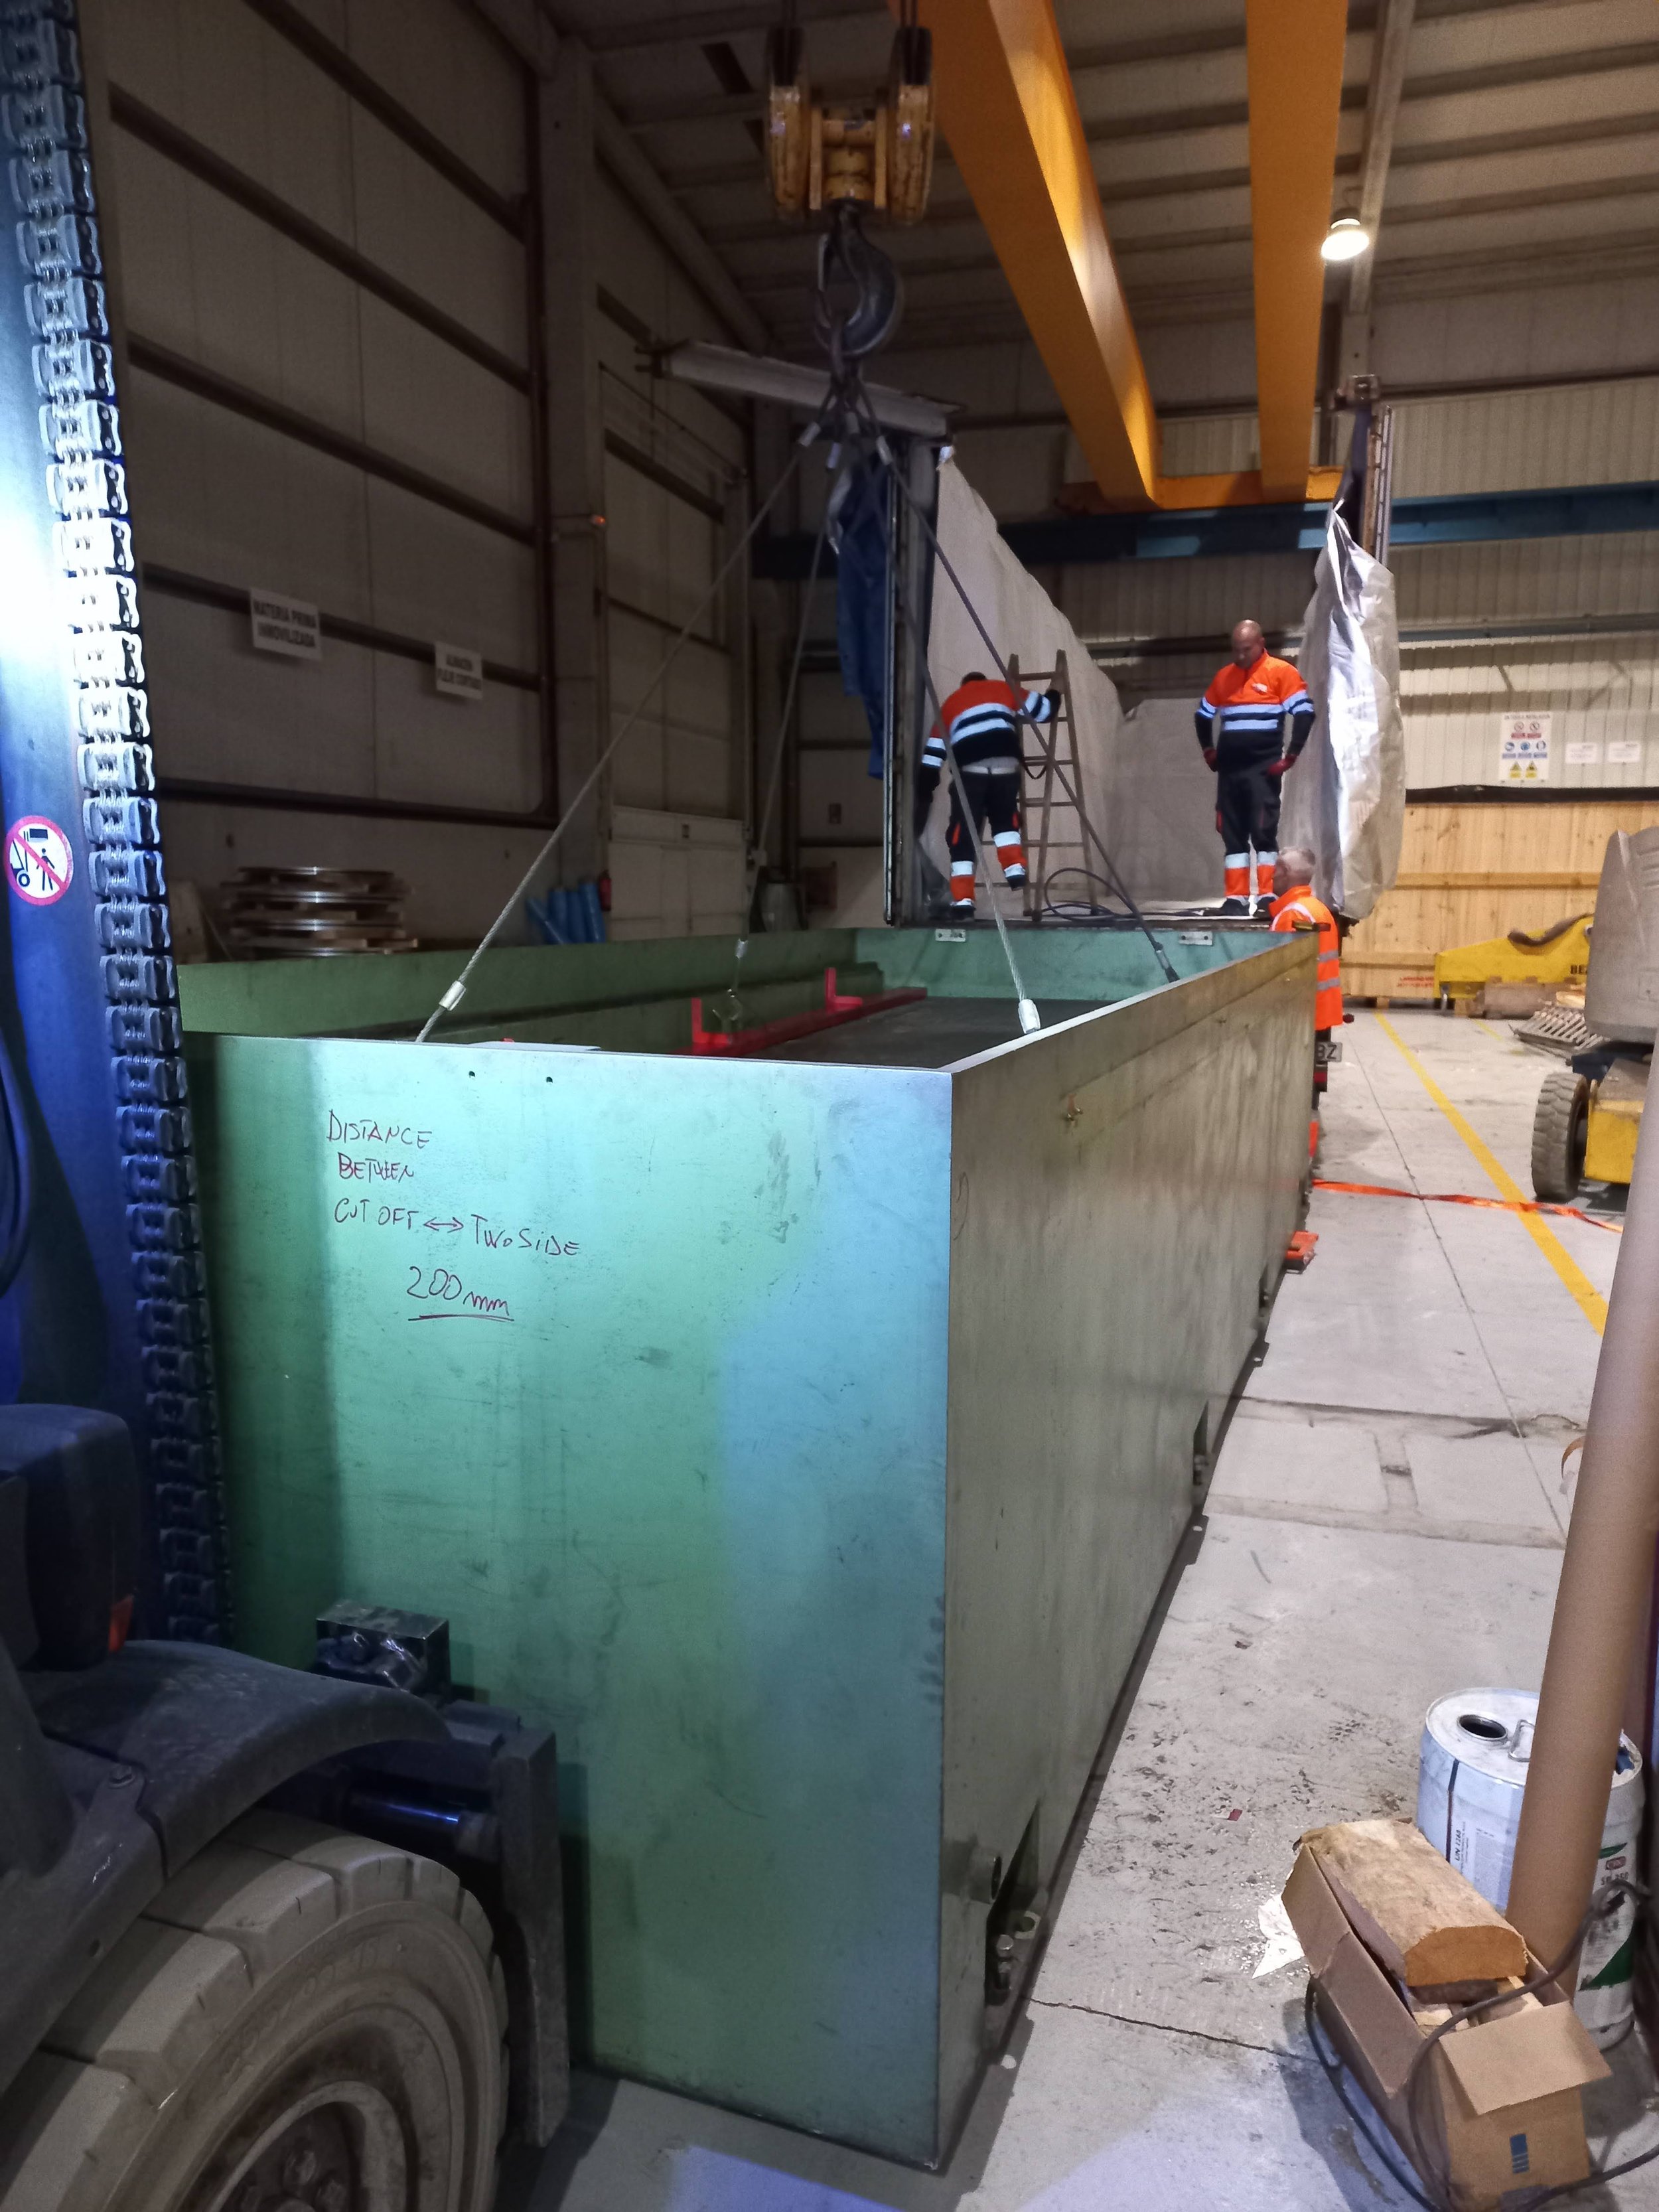 Mill tube machine delivered to Ontario from Spain